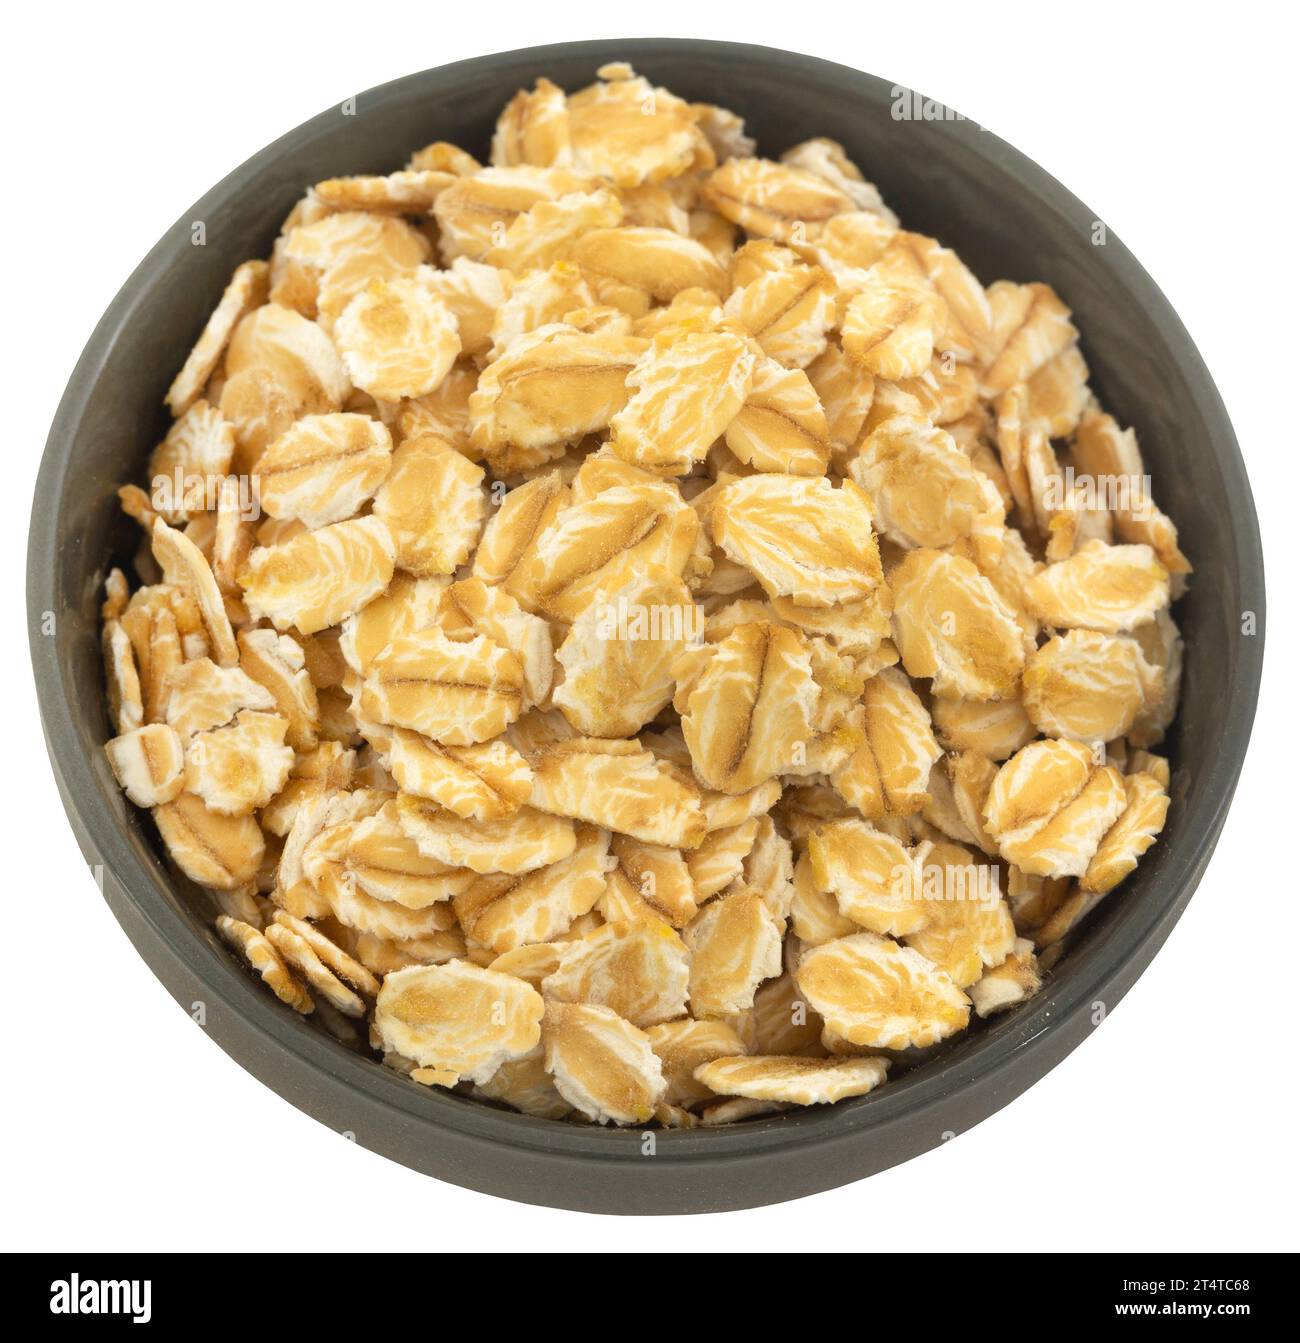 Whole oats in a bowl Stock Photo